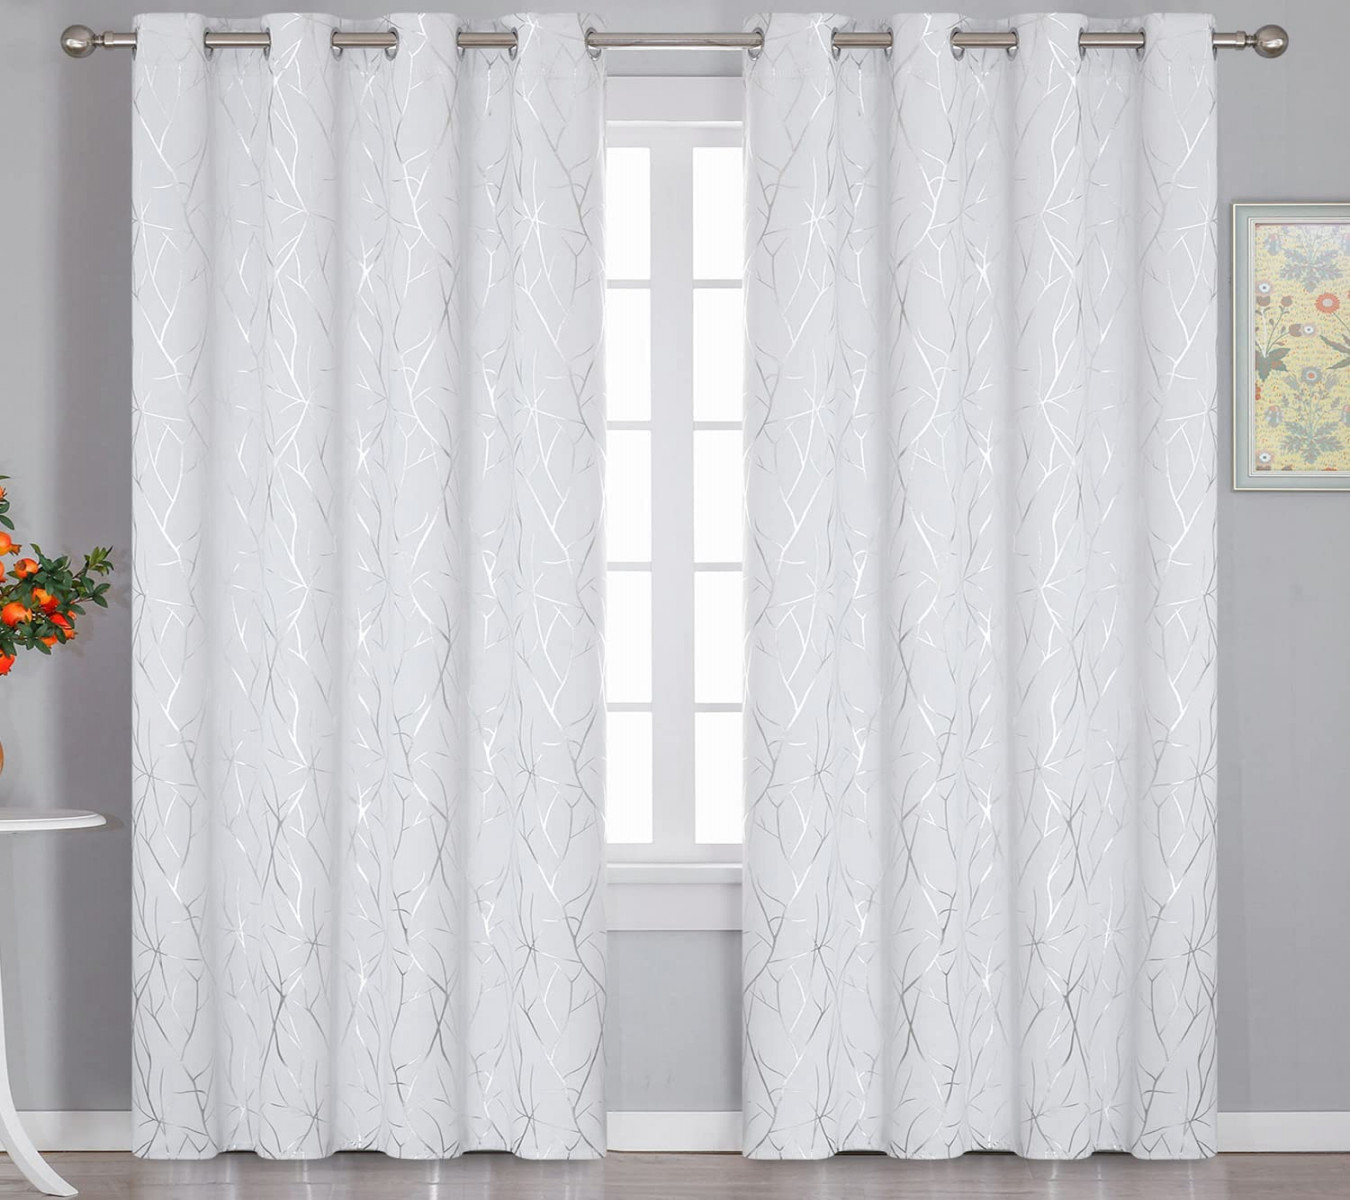 Estelar Textiler Grey White  Inch Long Window Curtains Room Blackout  Curtains Shade Heat Insulated Light Reducing Curtains for Living Room W  x